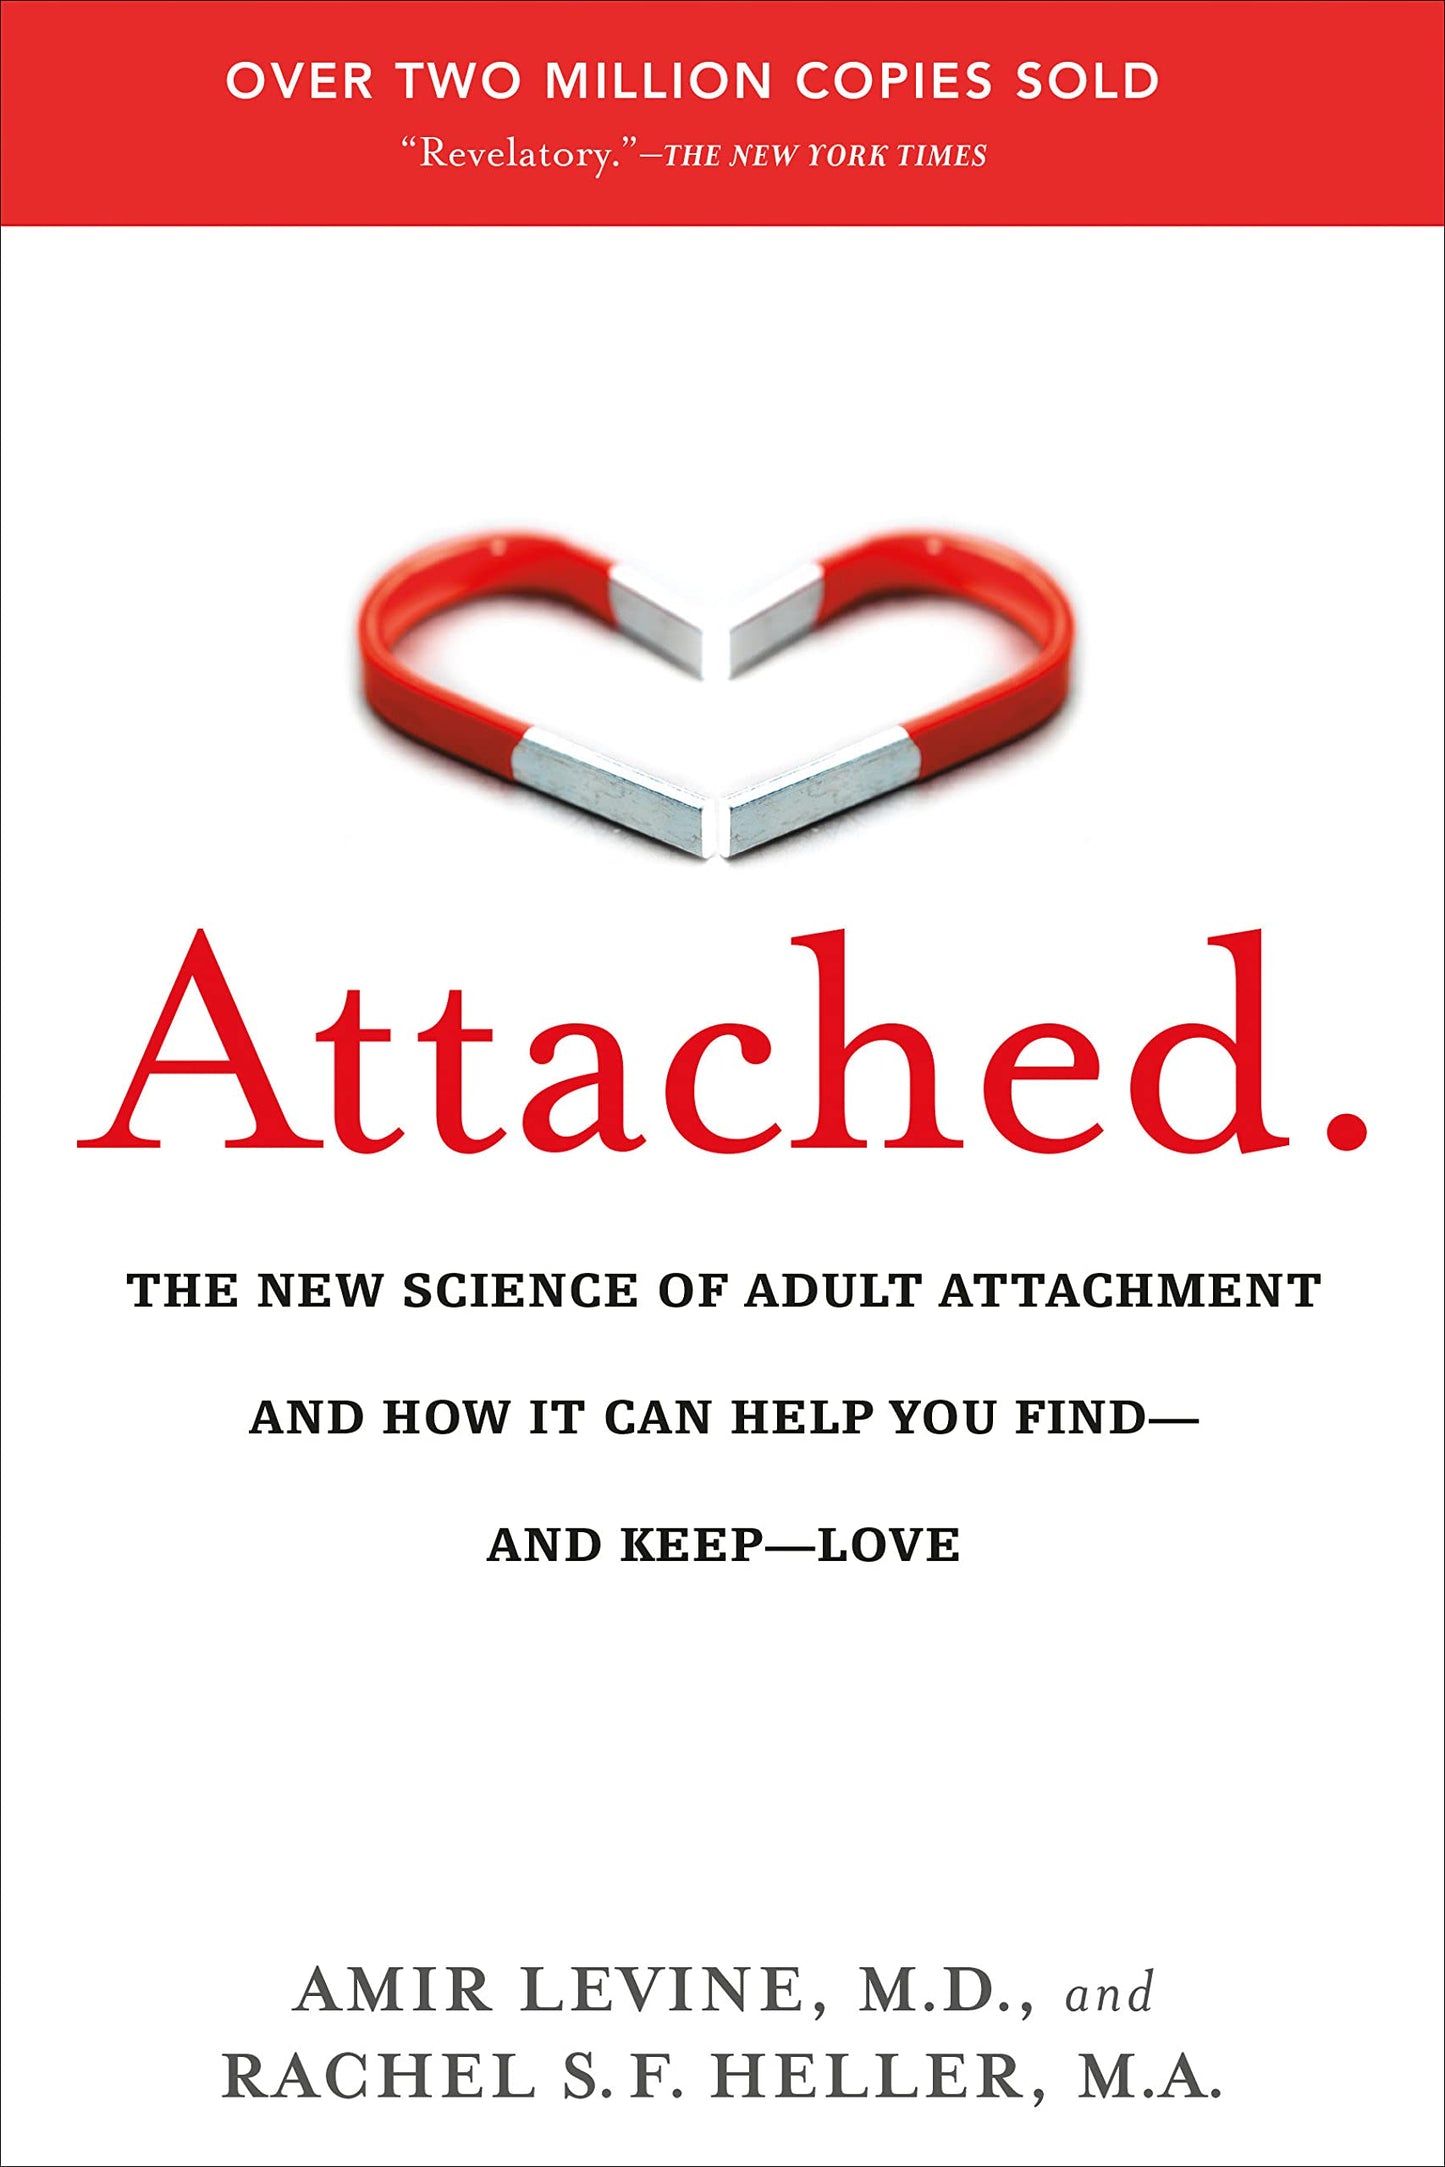 Attached, by Amir Levine & Rachel S.F. Heller